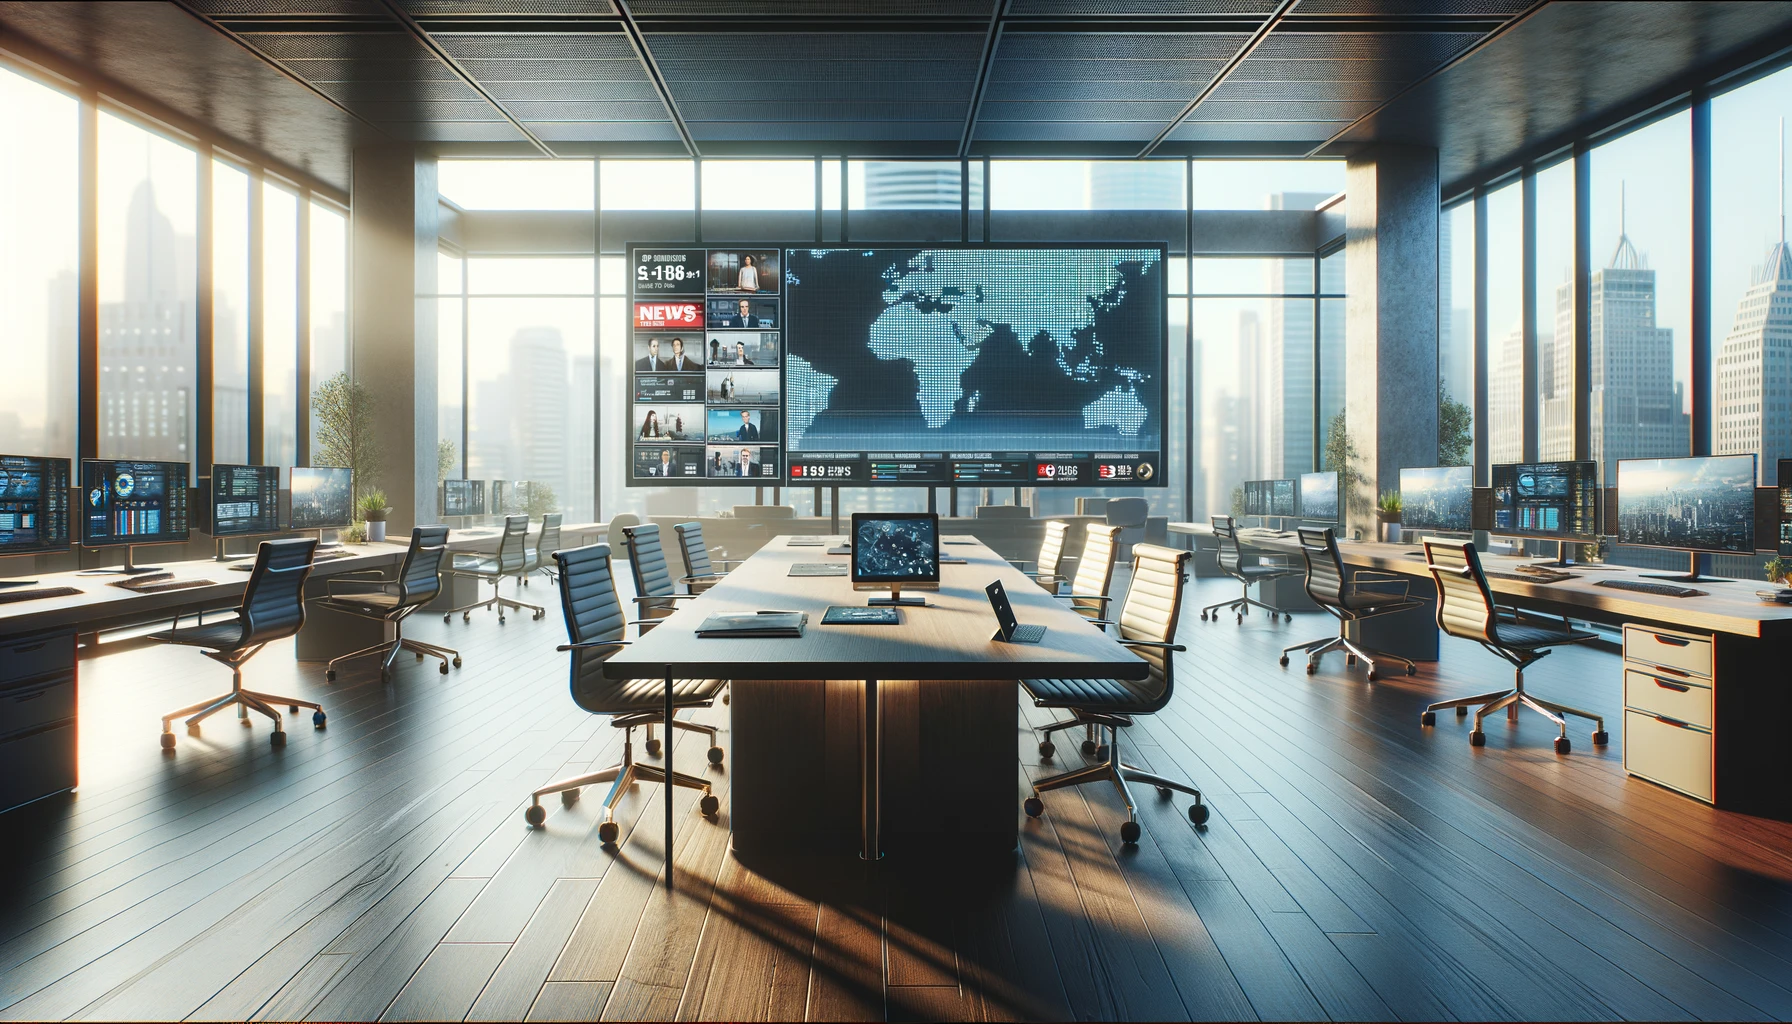 A realistic and detailed illustration focusing on a modern, naturally-lit office environment without any people. The office features a sleek desk with a digital tablet displaying global news, surrounded by multiple screens showing various current events. The room is filled with natural light from large windows that offer a view of the cityscape. The atmosphere is calm and professional, with a focus on the technology and workspace setup. The image should be in a 16:9 ratio, highlighting the contemporary and realistic office setting.